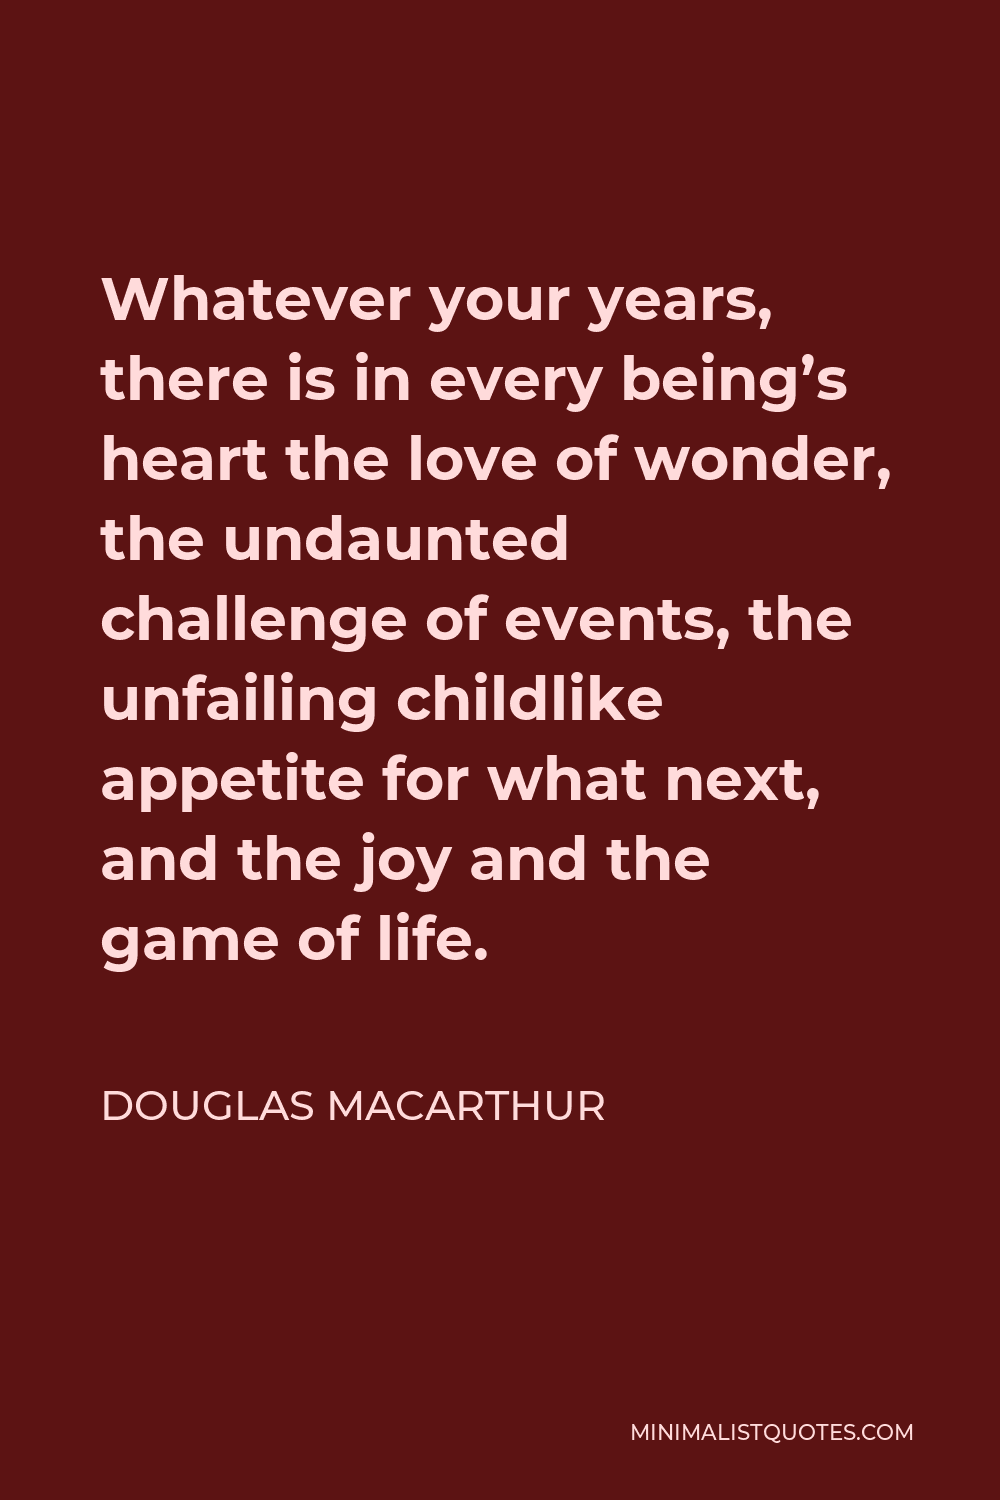 Douglas MacArthur Quote - Whatever your years, there is in every being’s heart the love of wonder, the undaunted challenge of events, the unfailing childlike appetite for what next, and the joy and the game of life.